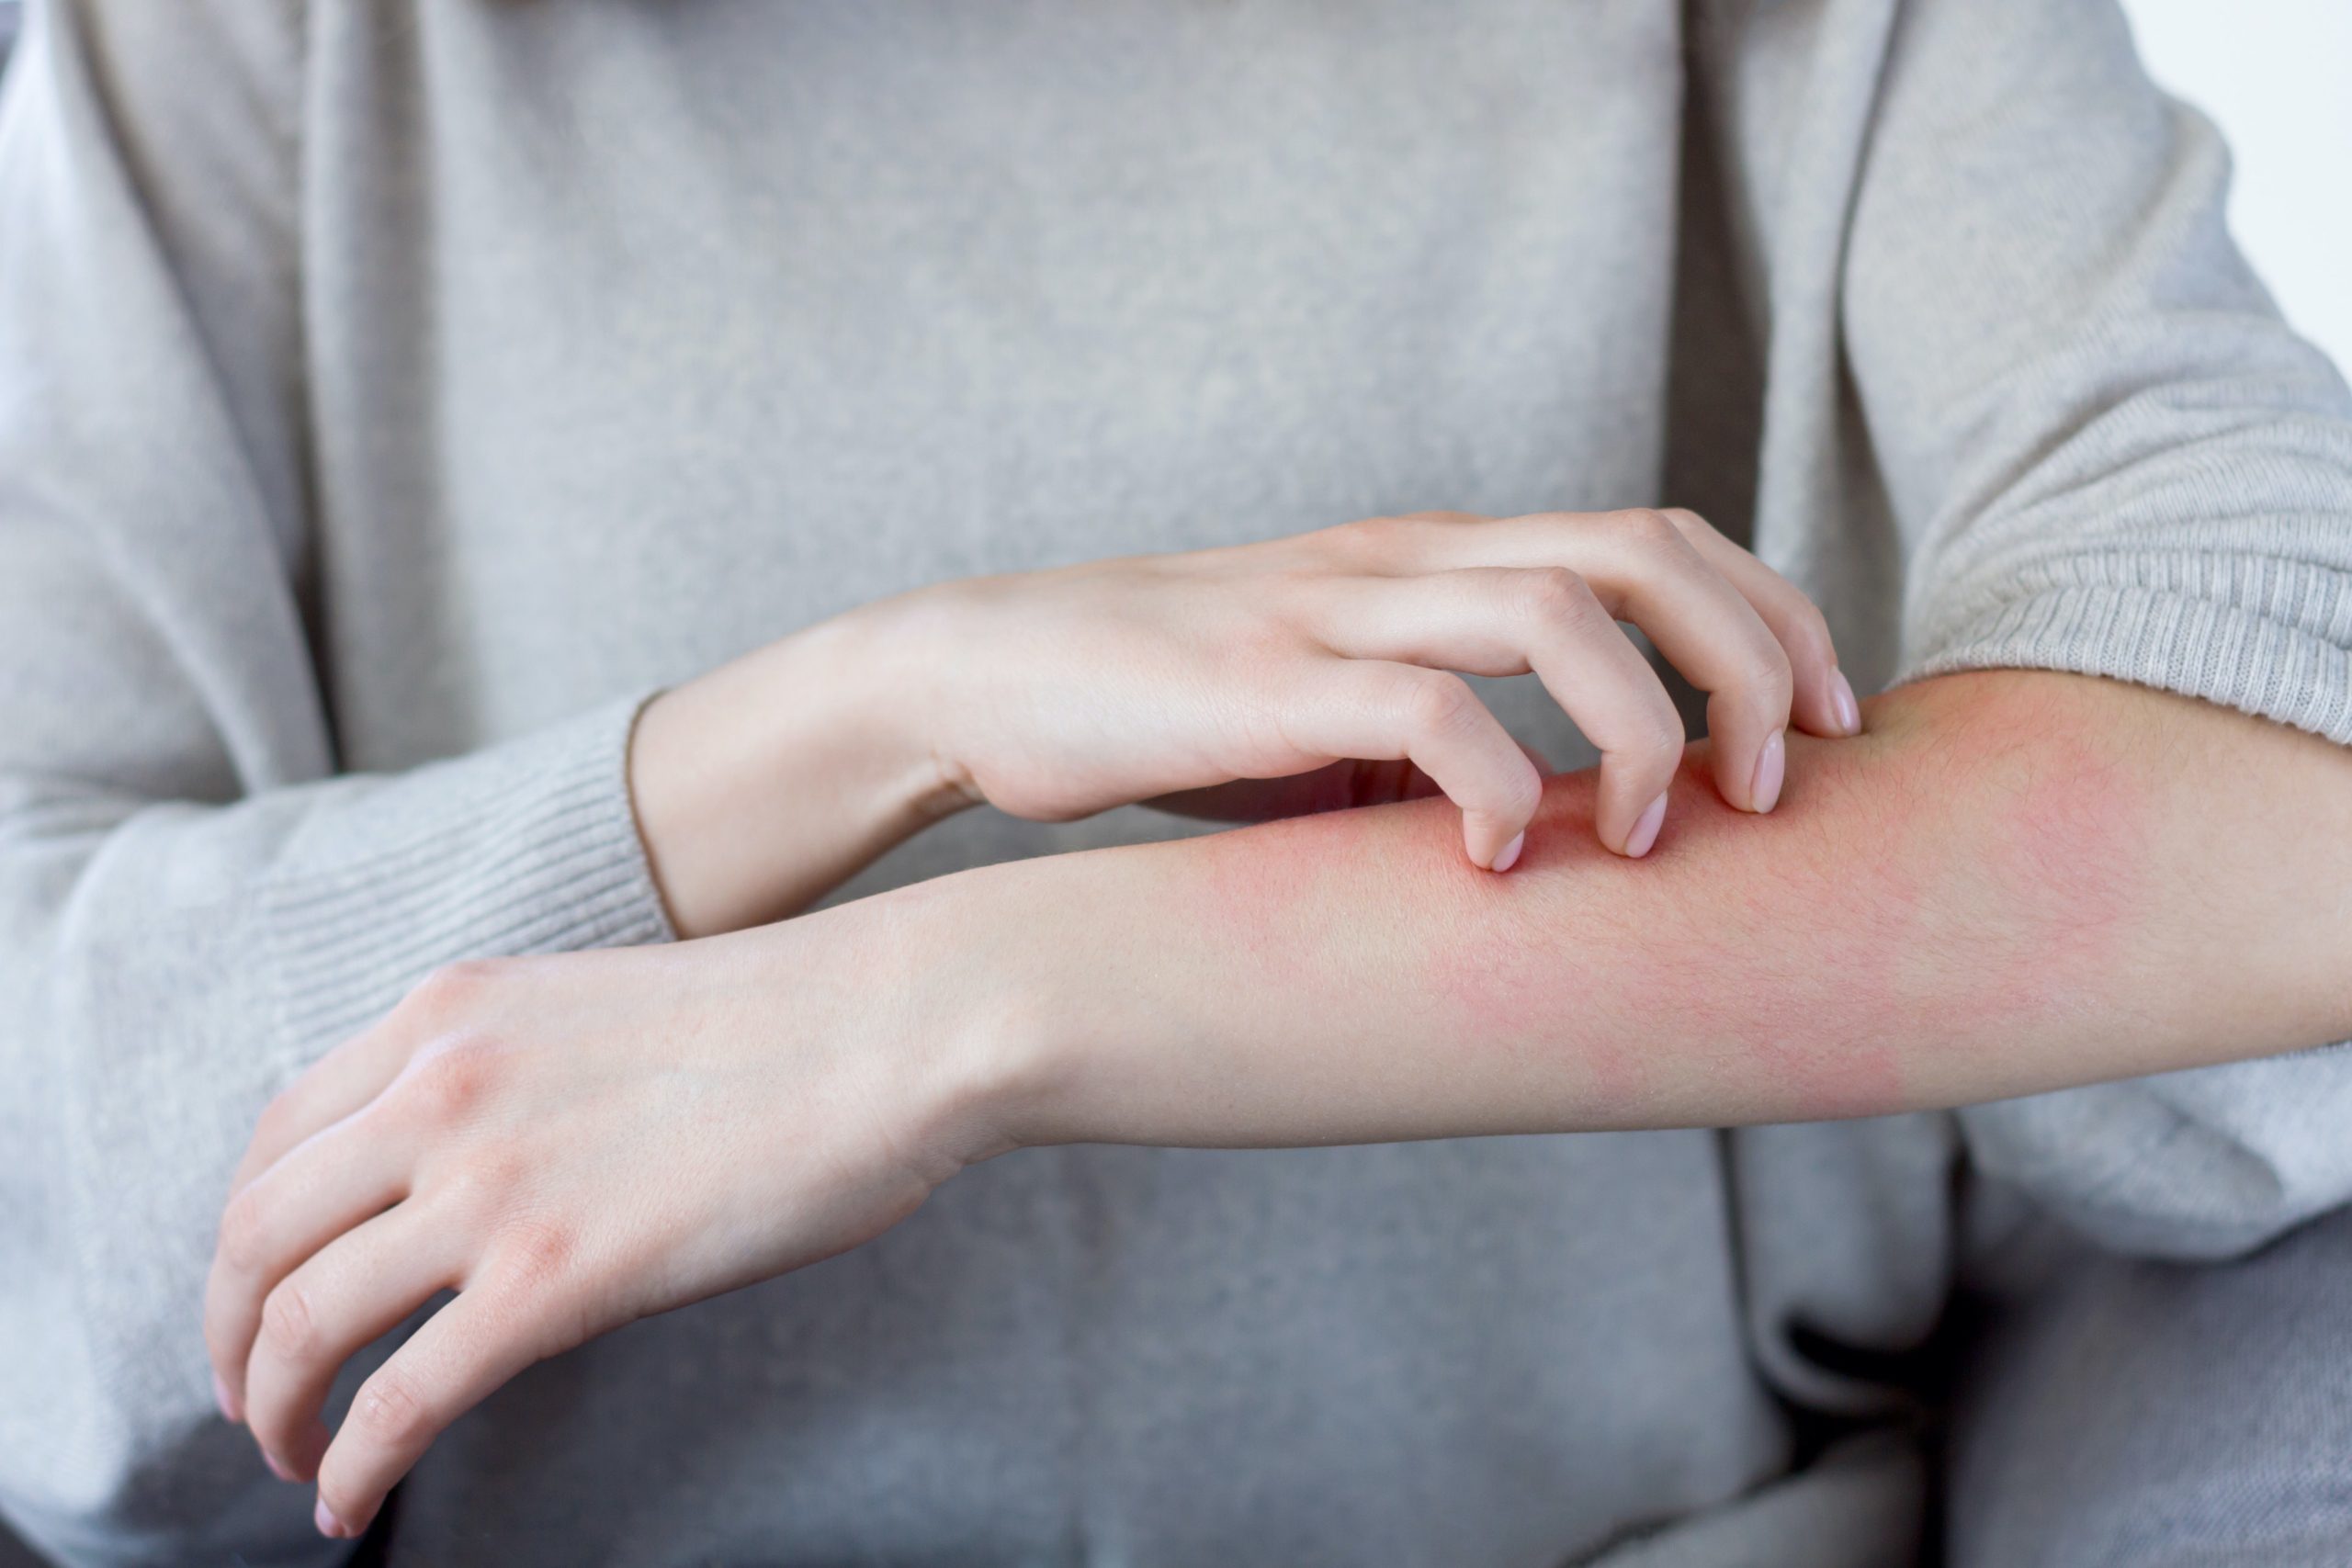 Can a Skin Blanching Test Tell You if a Rash is Serious? Experts Explain